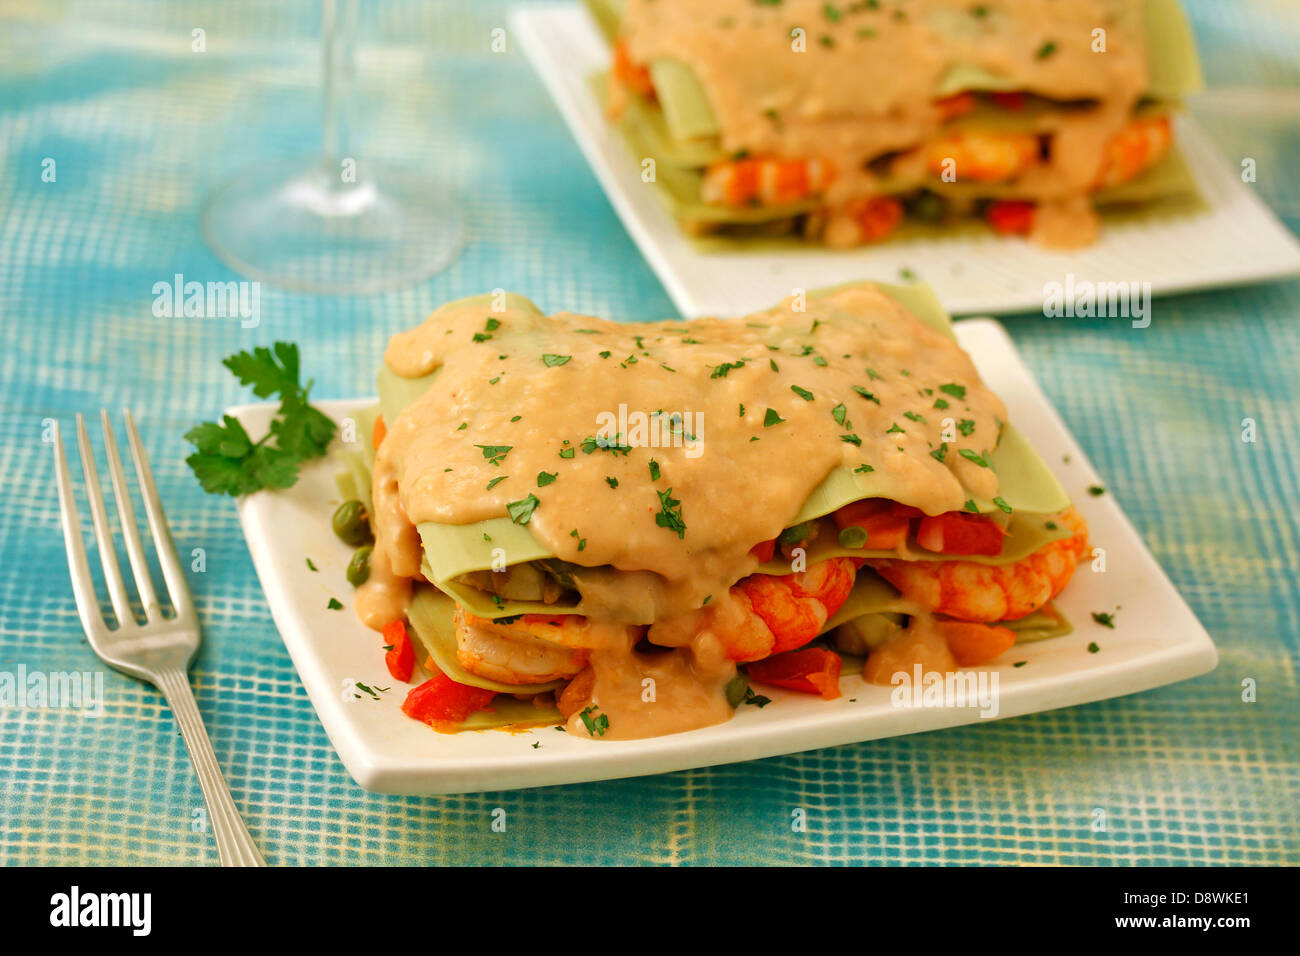 Lasagna with vegetables, mushrooms and prawns. Recipe availabl Stock Photo